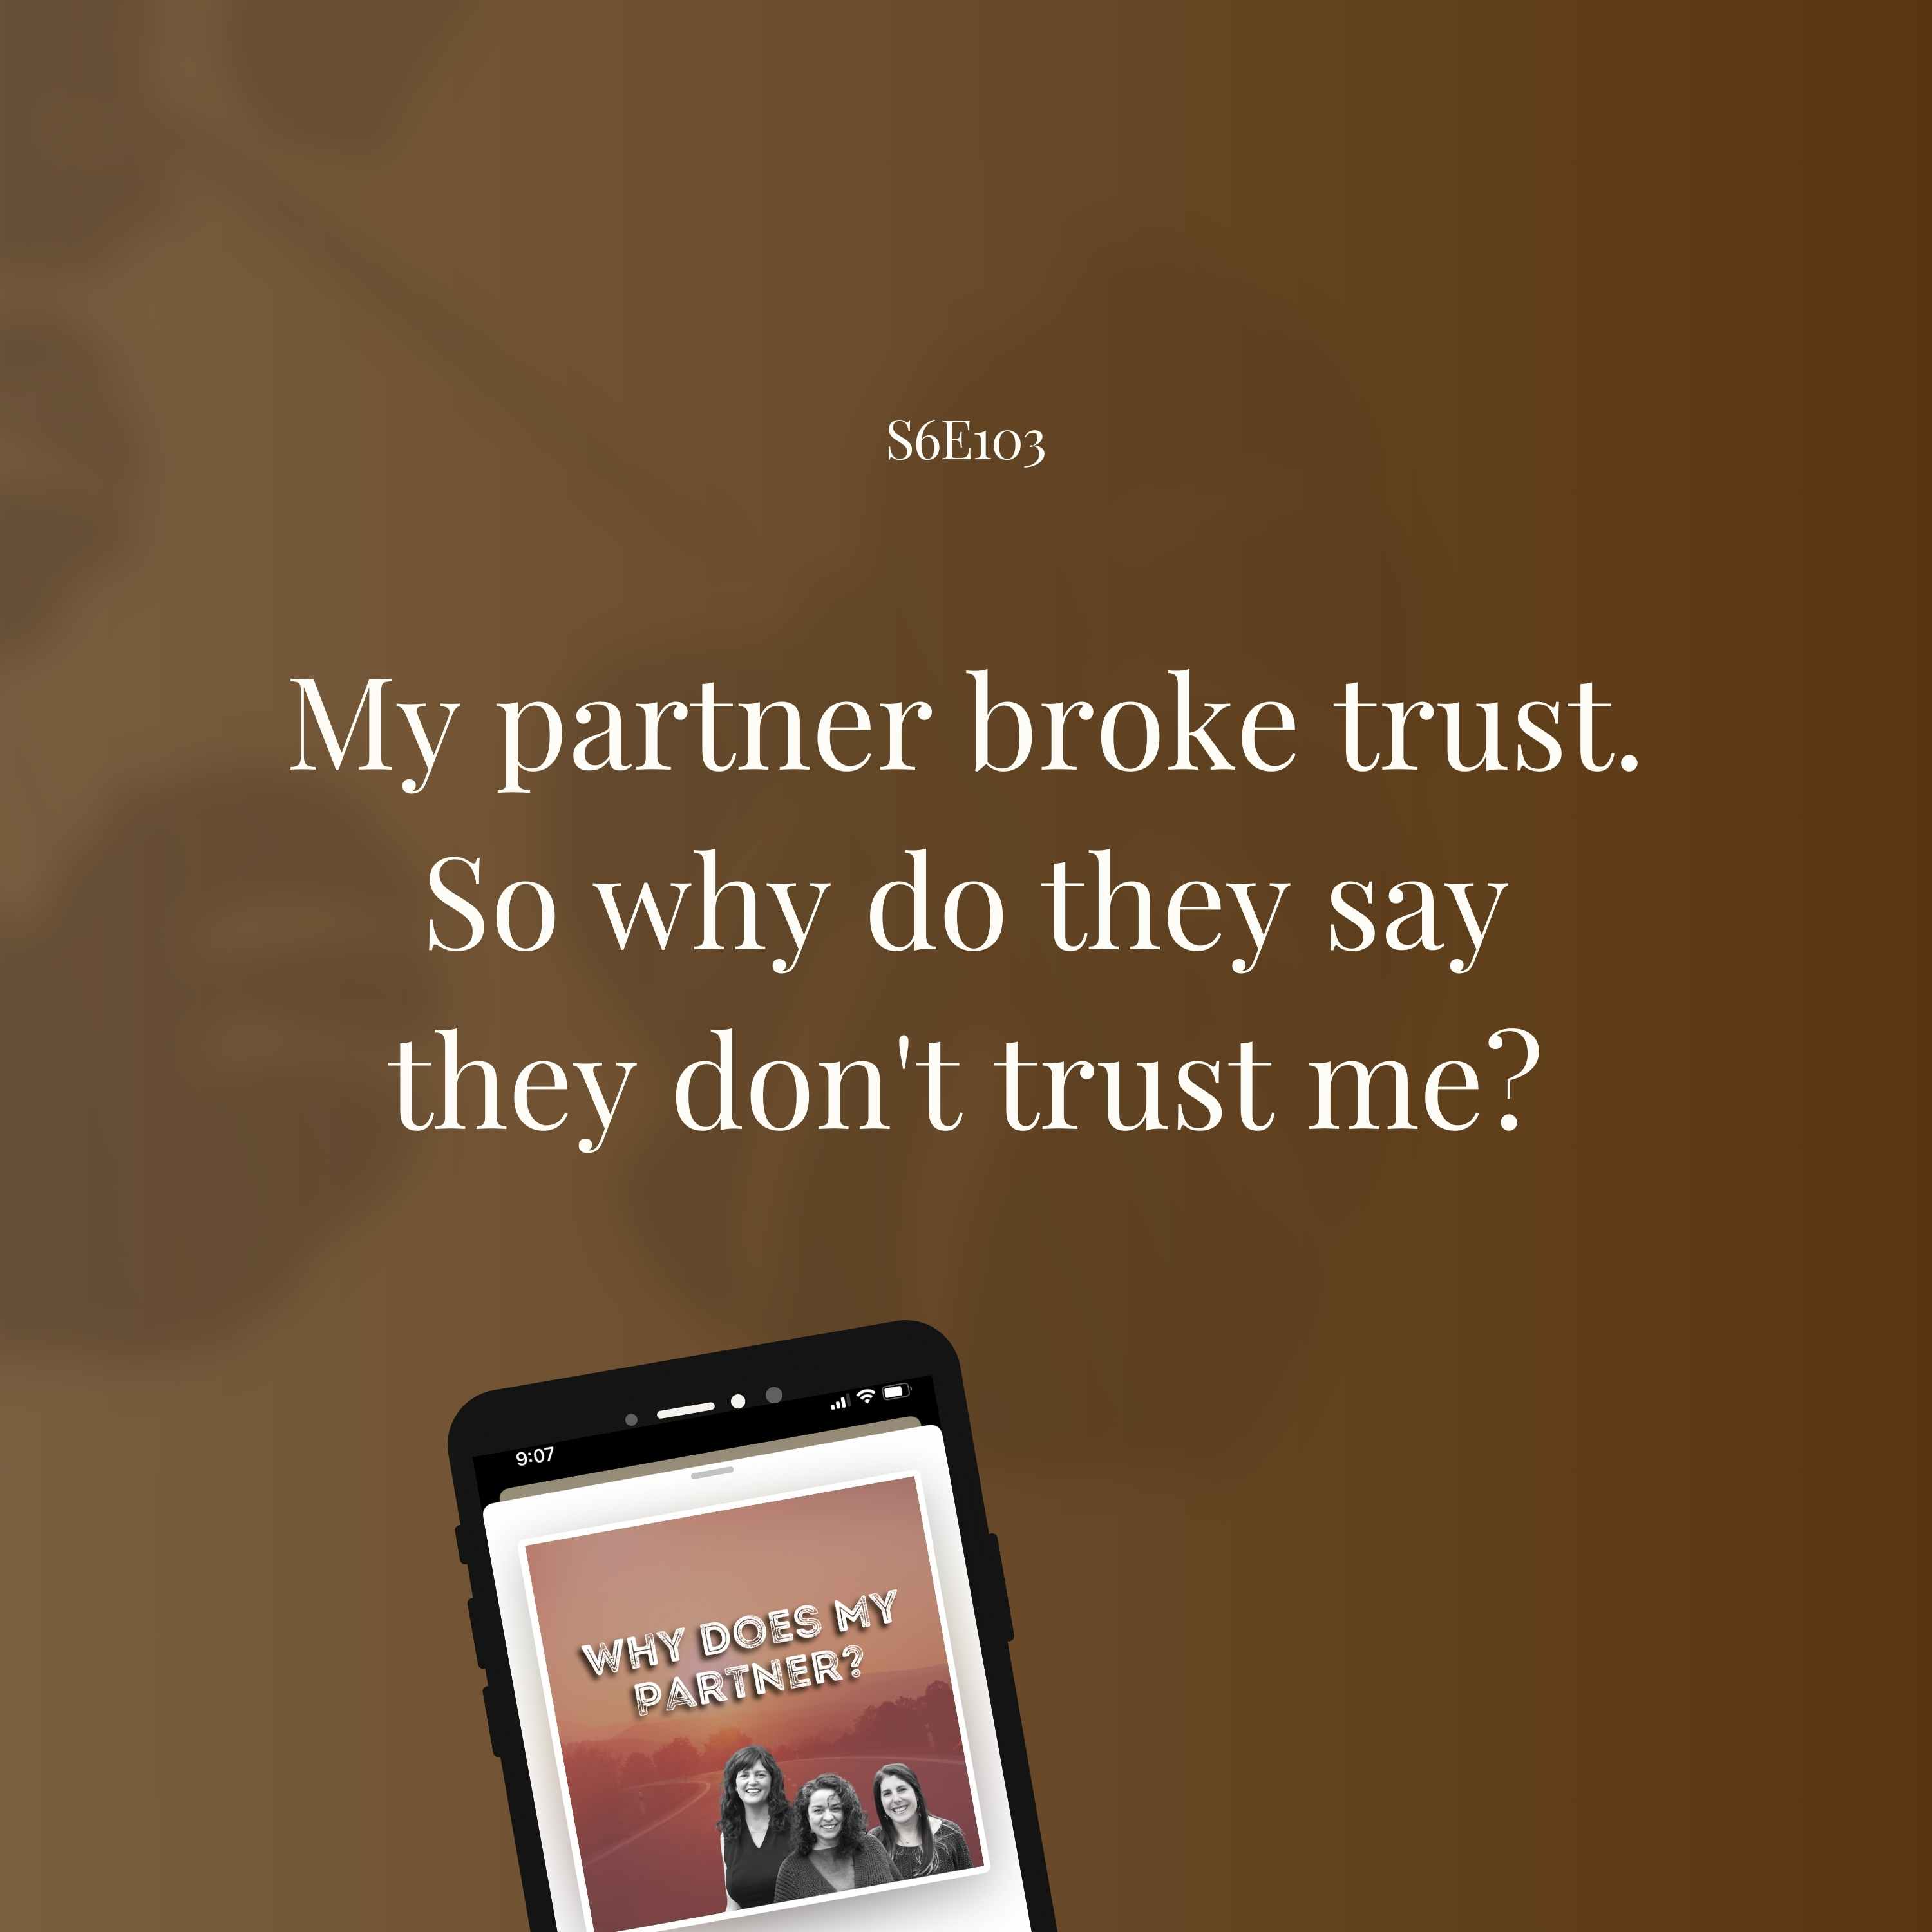 My partner broke trust. So why do they say that they don't trust me?